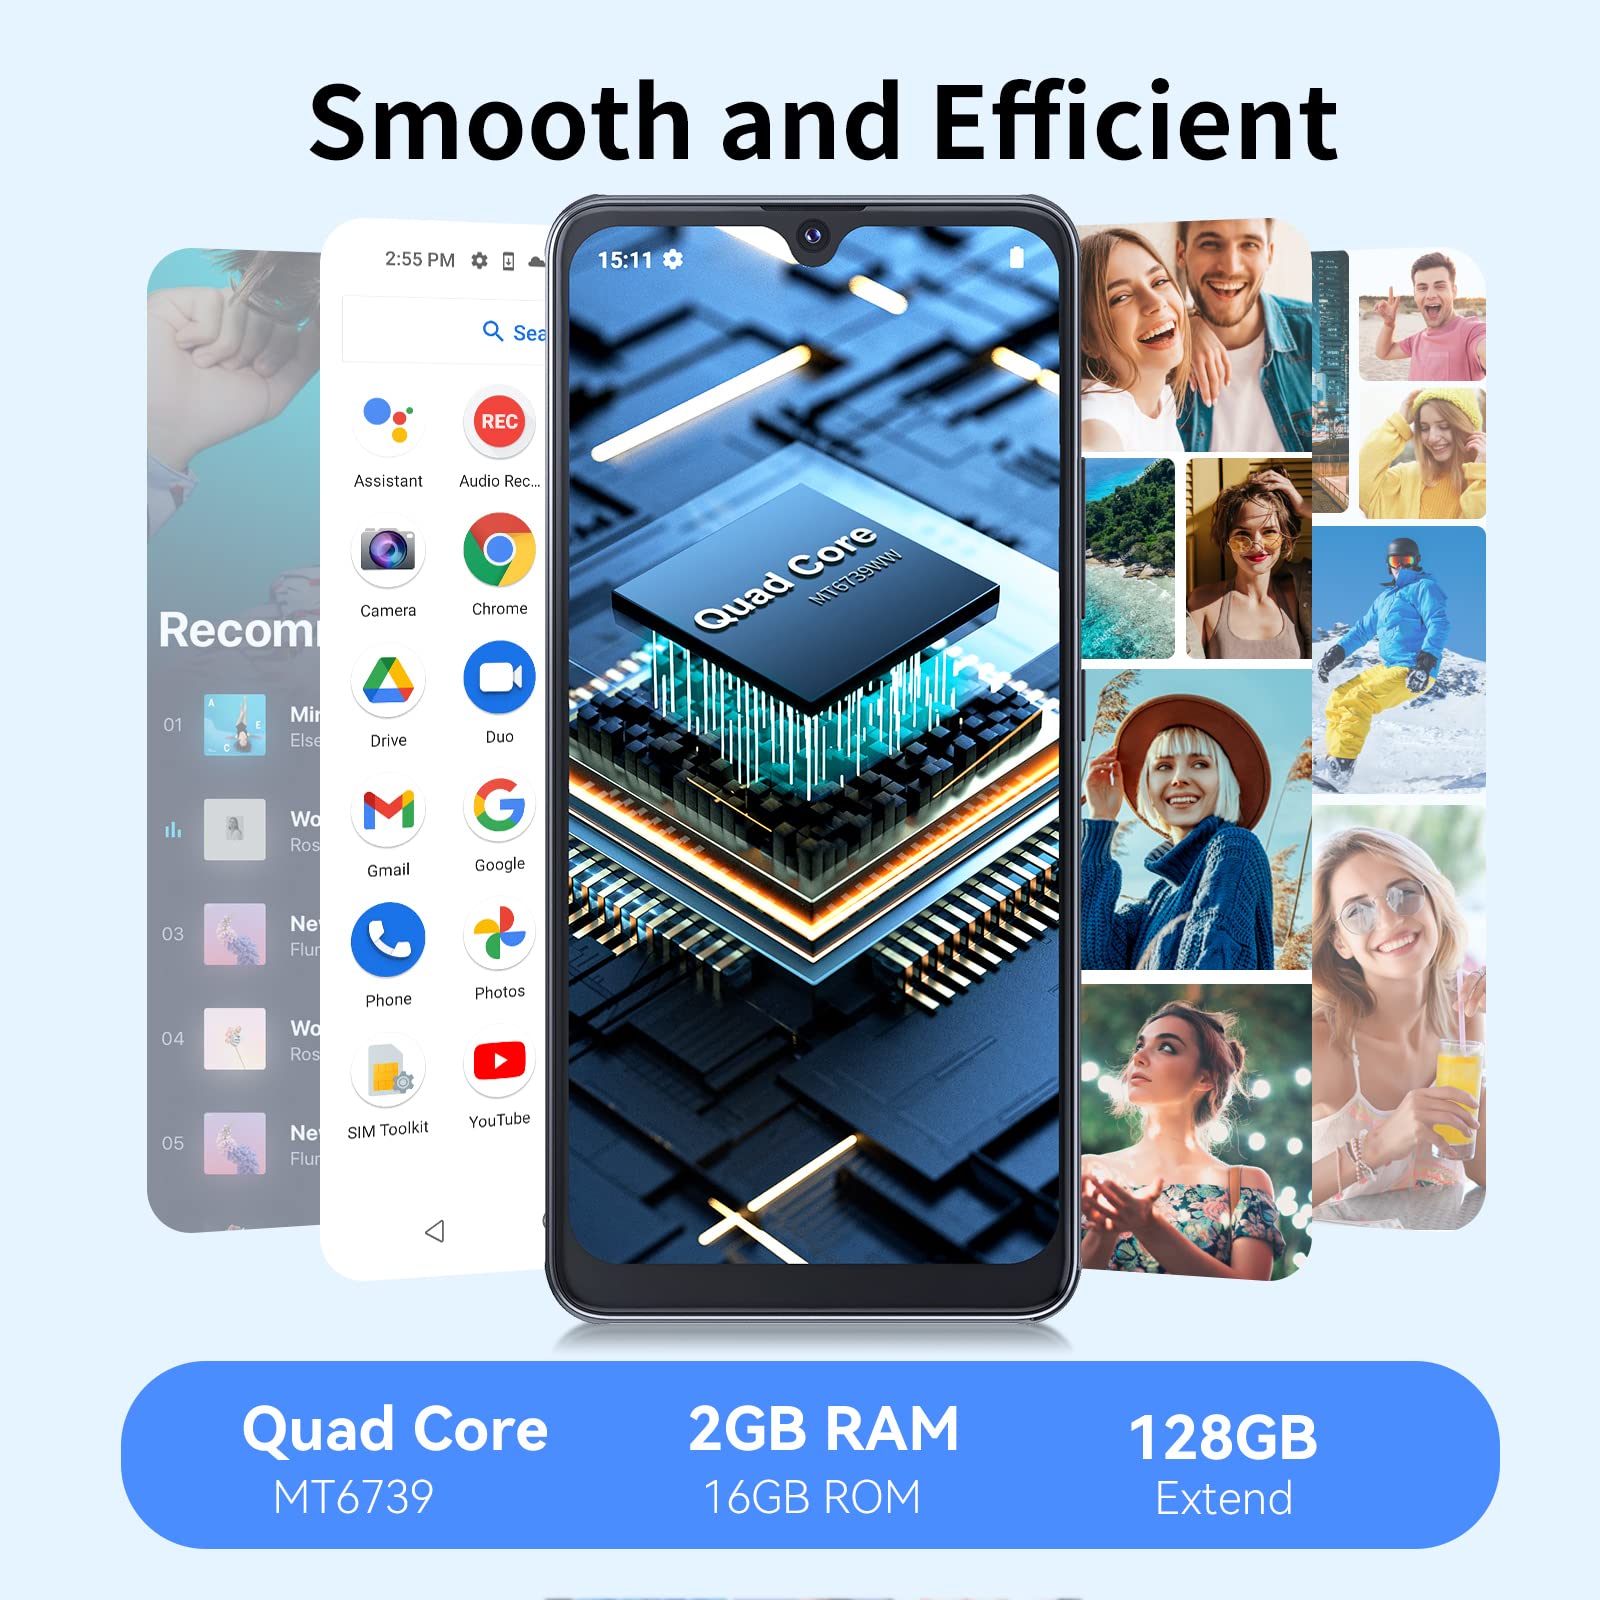 CUBOT Note 8 Smartphone Without Contract, 4G Android 11 Mobile Phone, 5.5 Inch HD Display, 13MP + 5MP Camera, 3100mAh Battery, 2GB/16GB, 128GB Expandable, Dual SIM